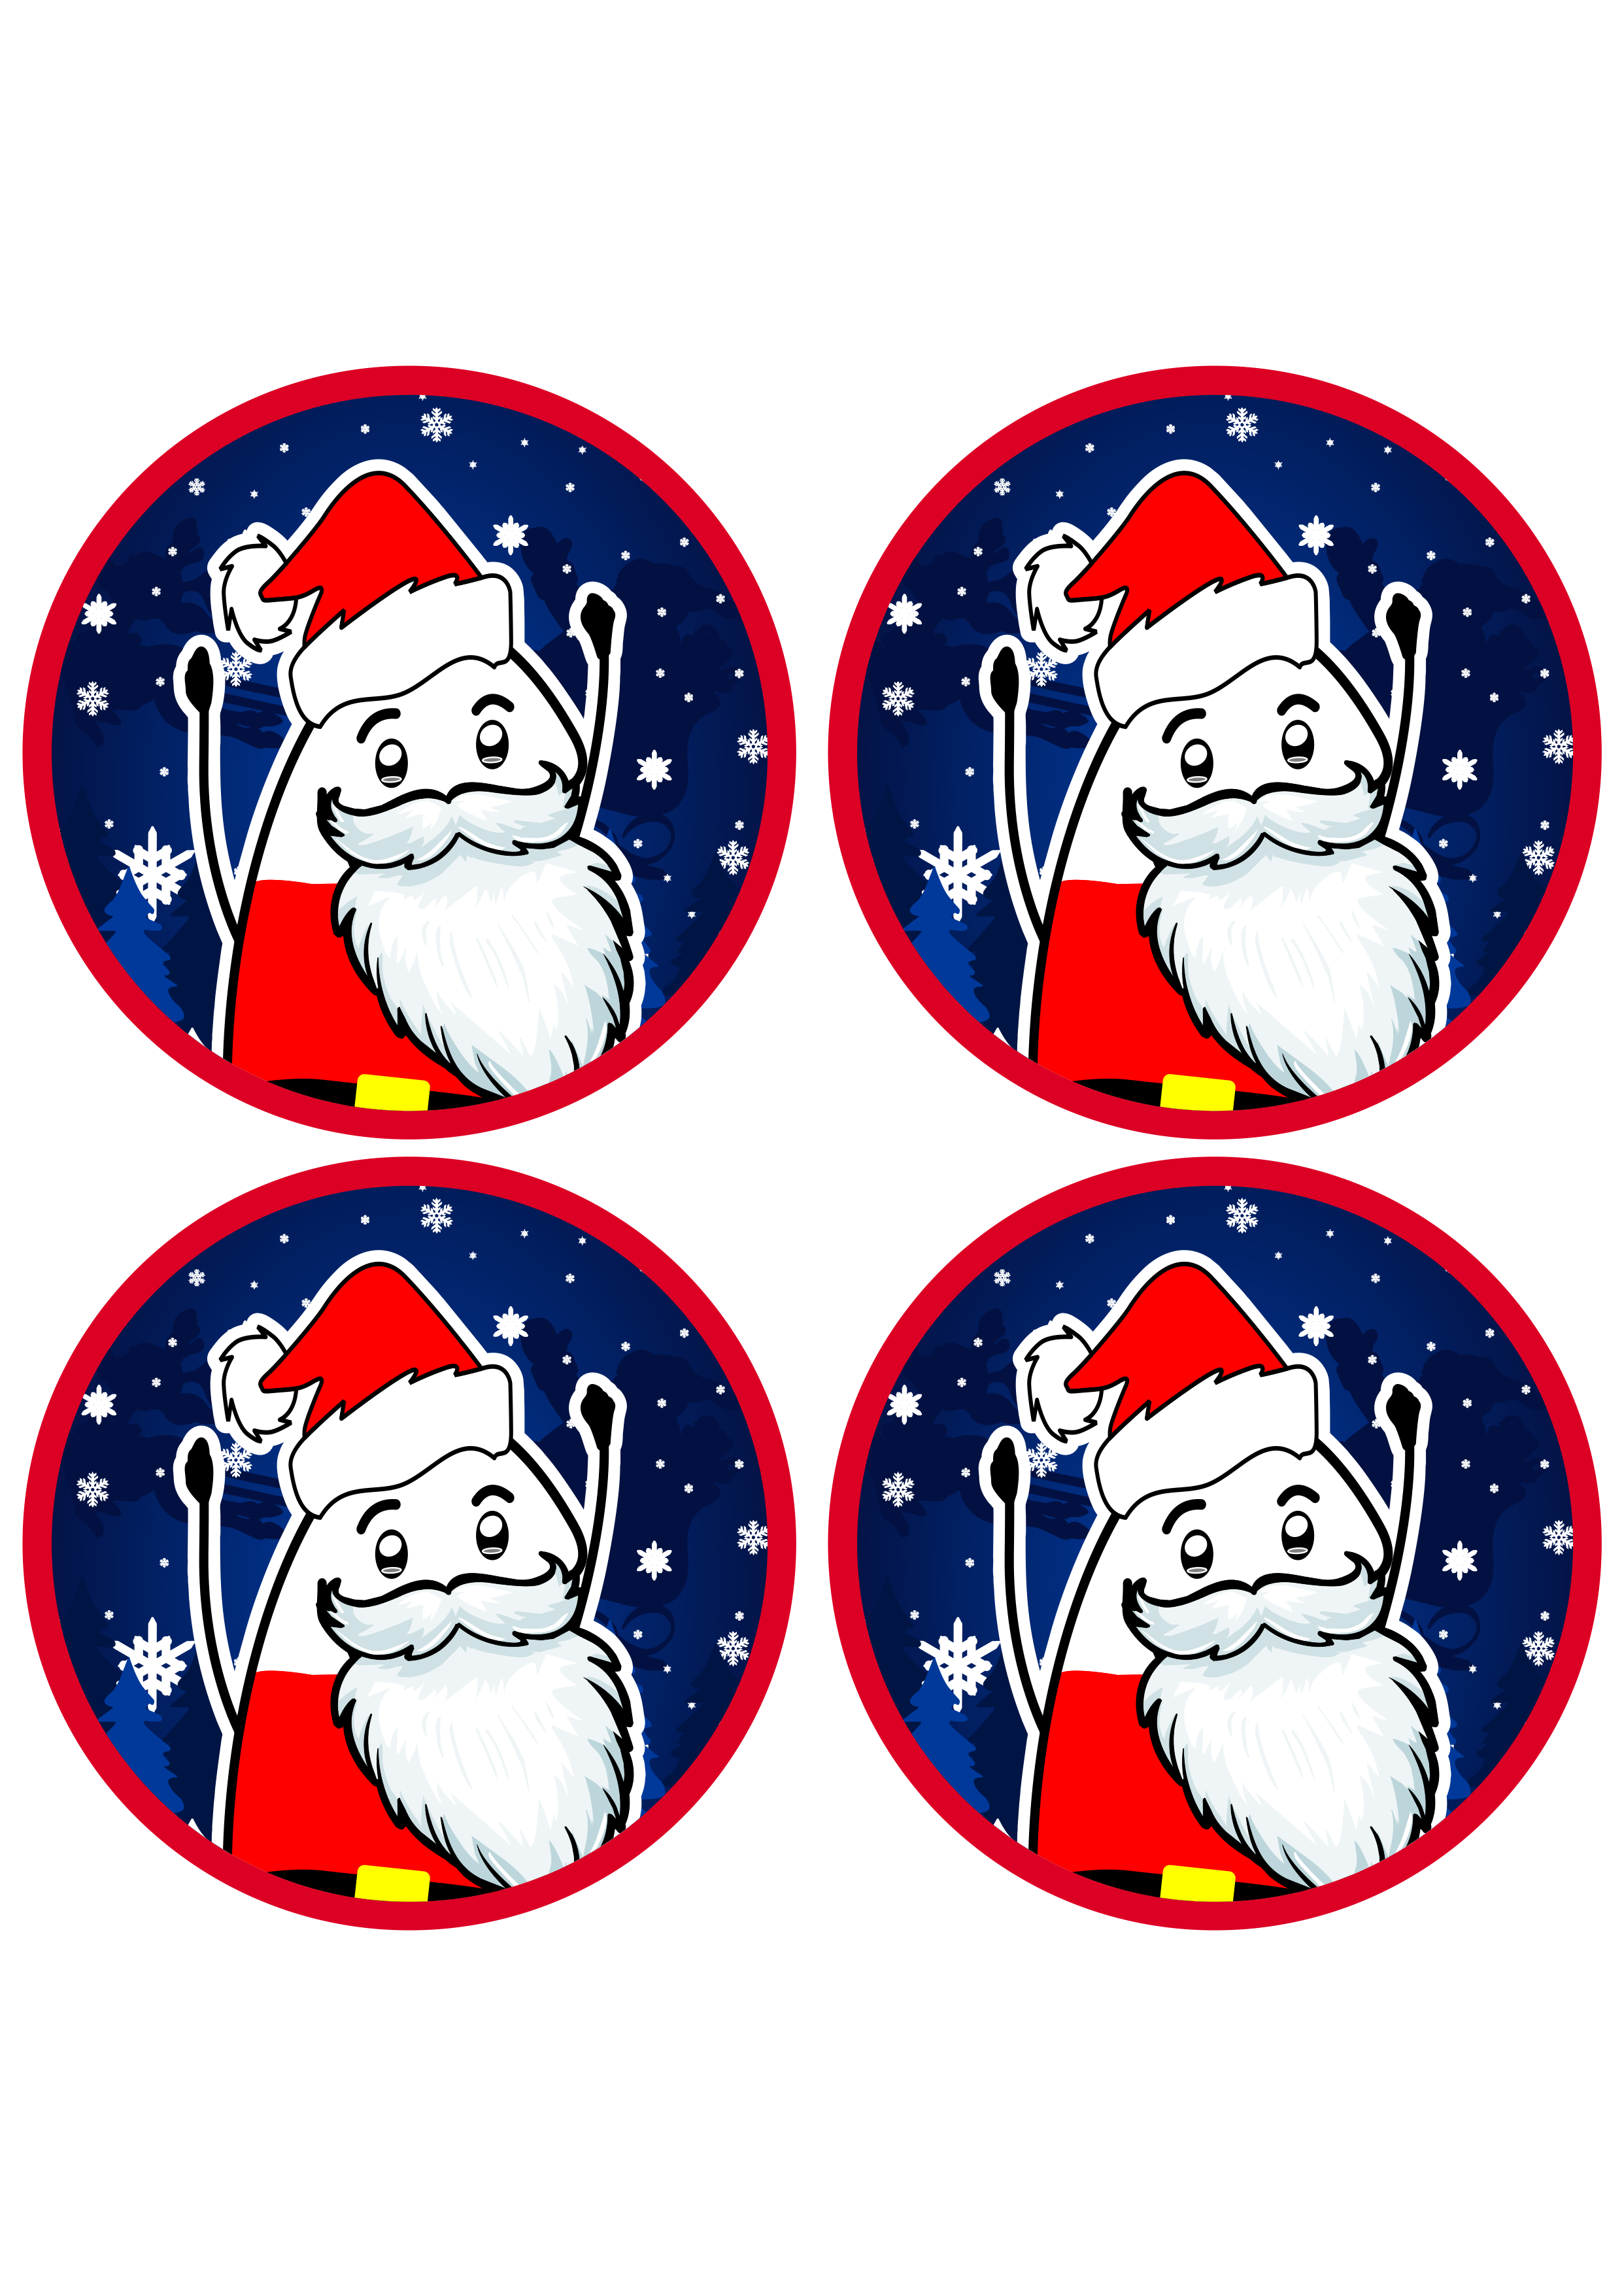 Flork of cows papai noel adesivos stickers tags 4 unidades png